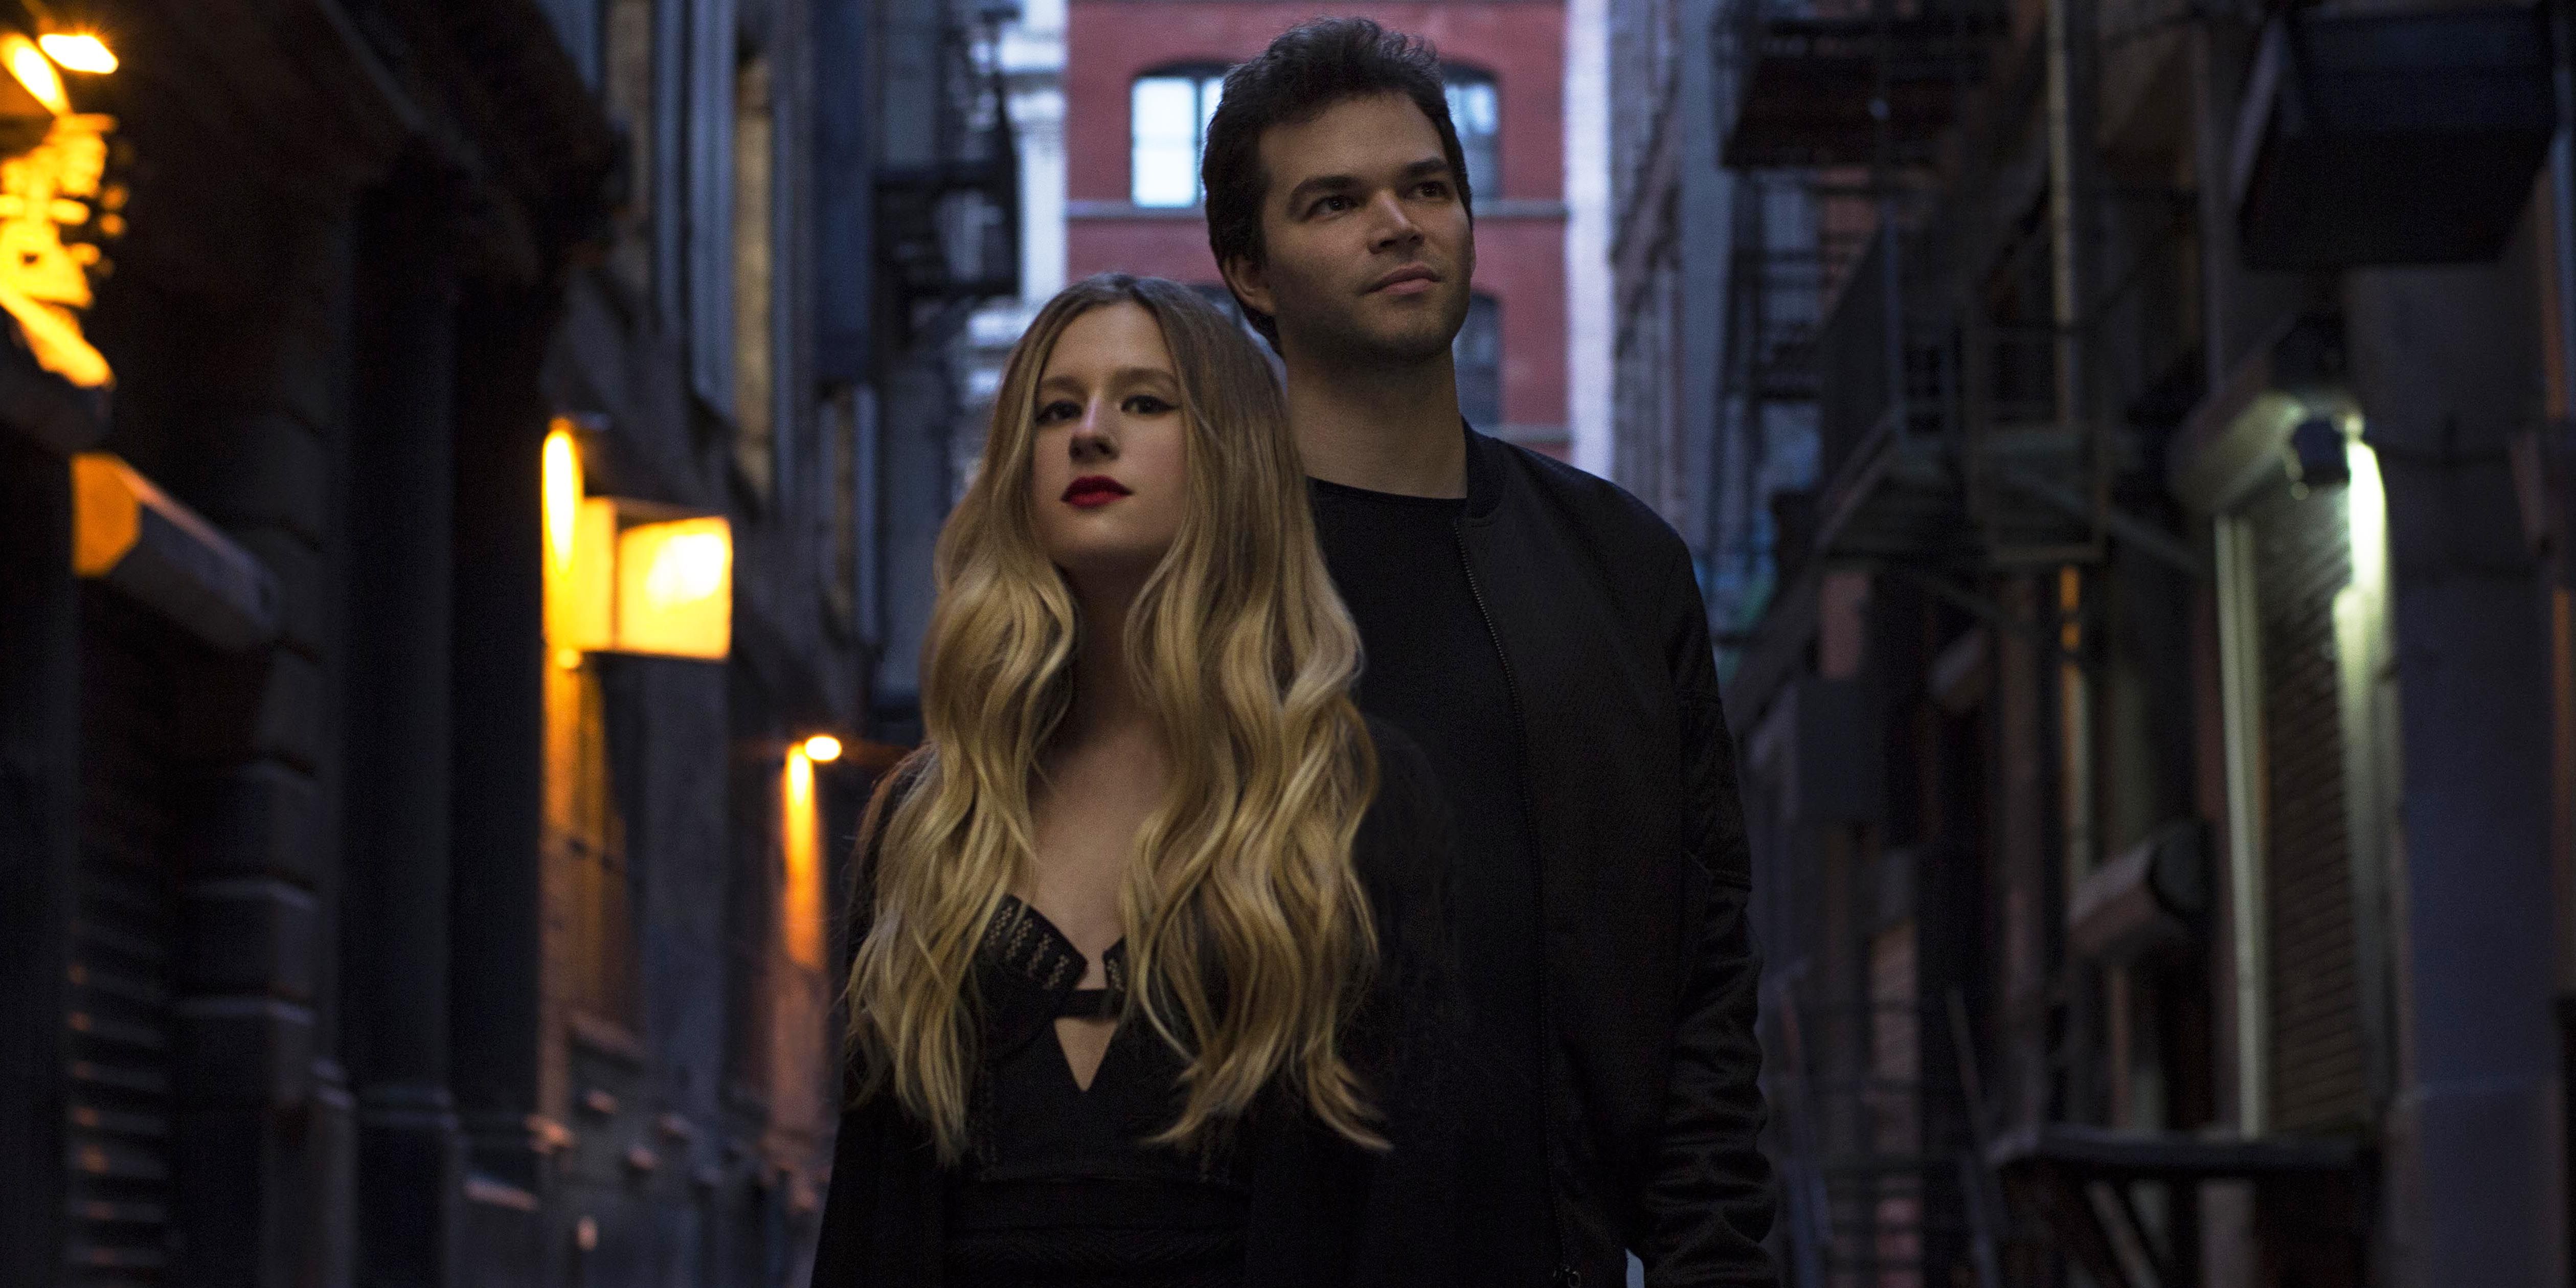 songs like down by marian hill